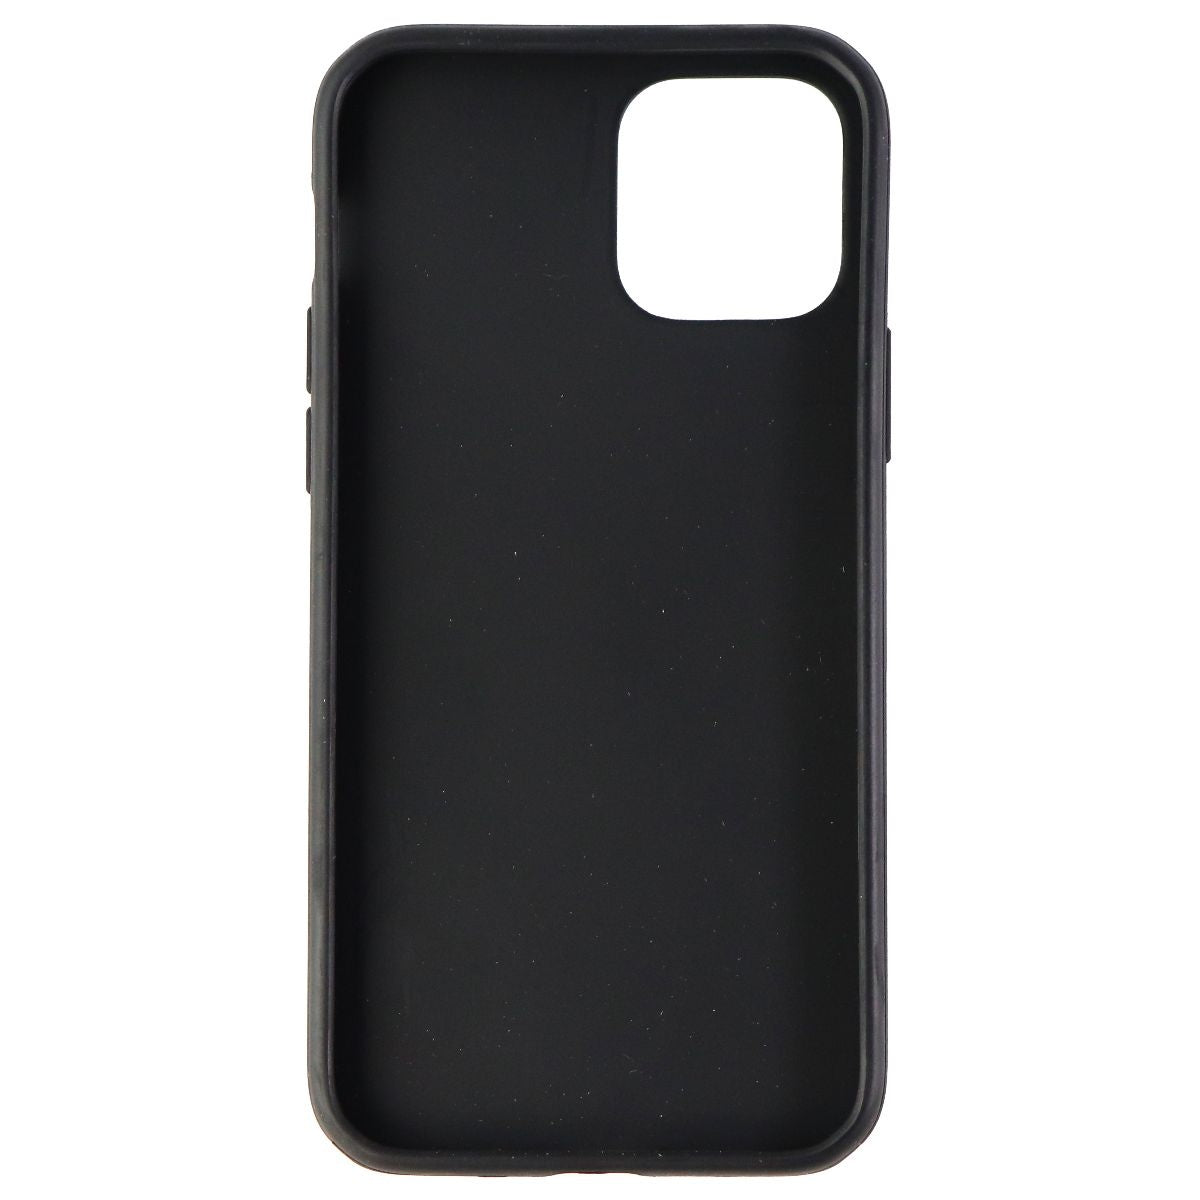 Tech21 Evo Lite Series Case for Apple iPhone 12 / iPhone 12 Pro - Black Cell Phone - Cases, Covers & Skins Tech21    - Simple Cell Bulk Wholesale Pricing - USA Seller